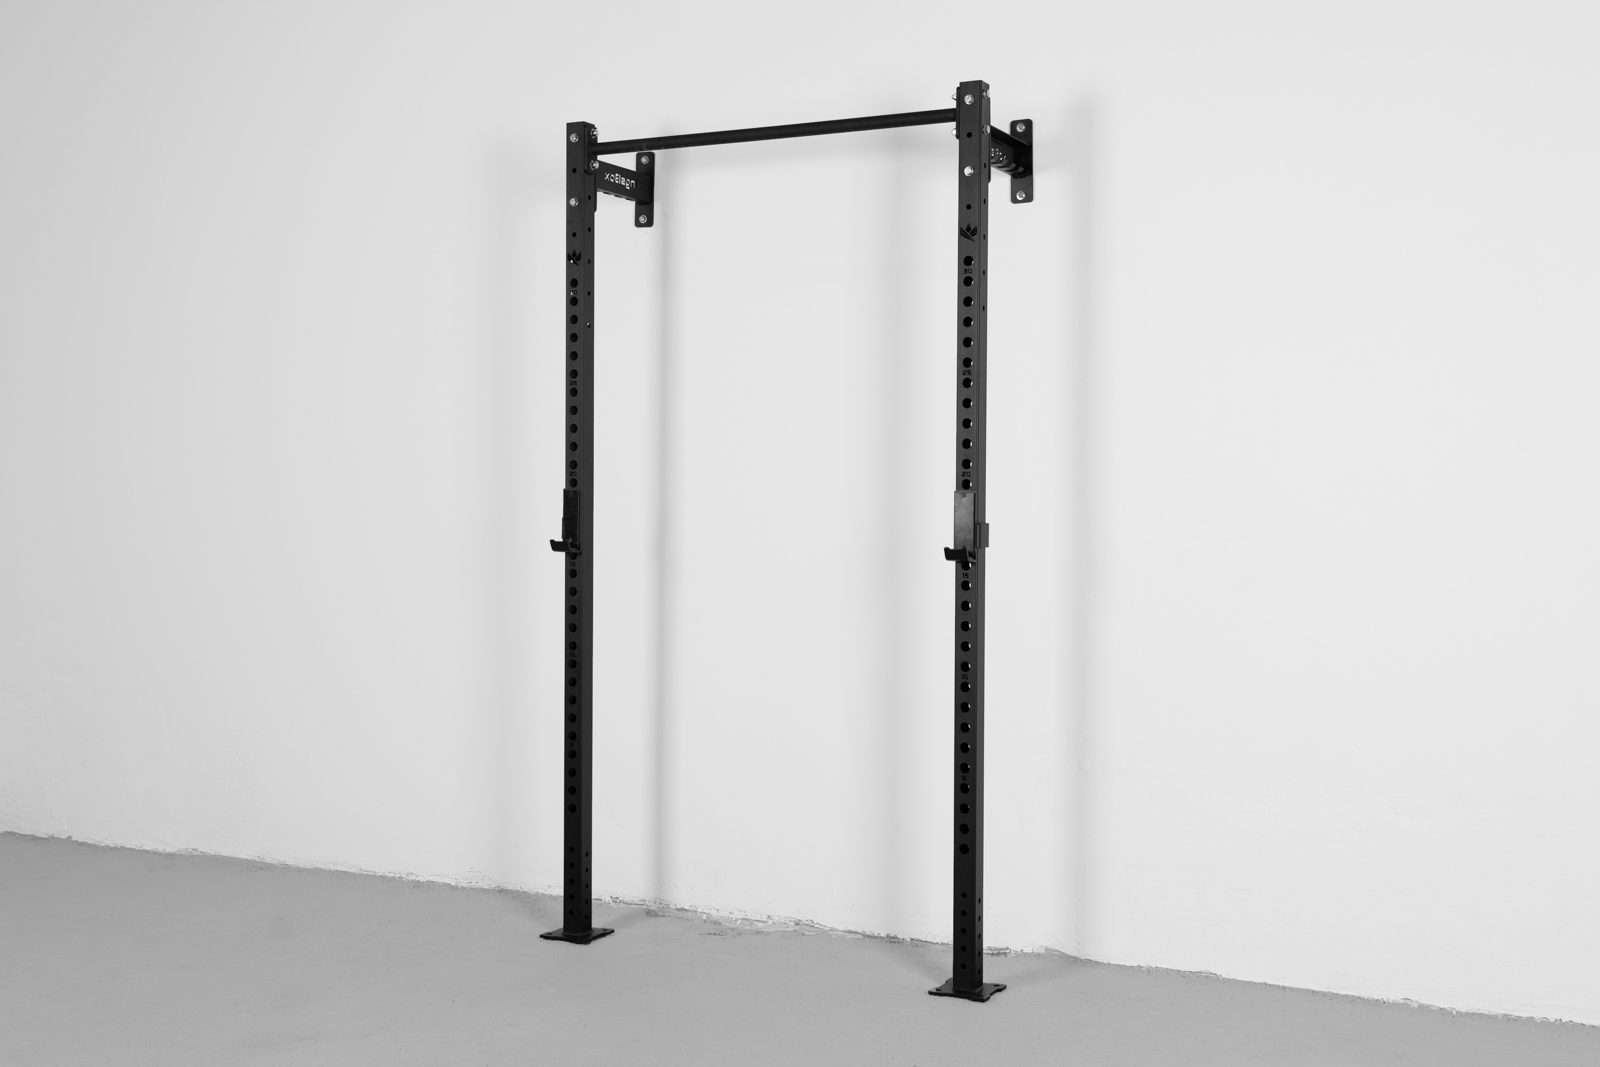 OUTLET - Royal Wall Squat Station